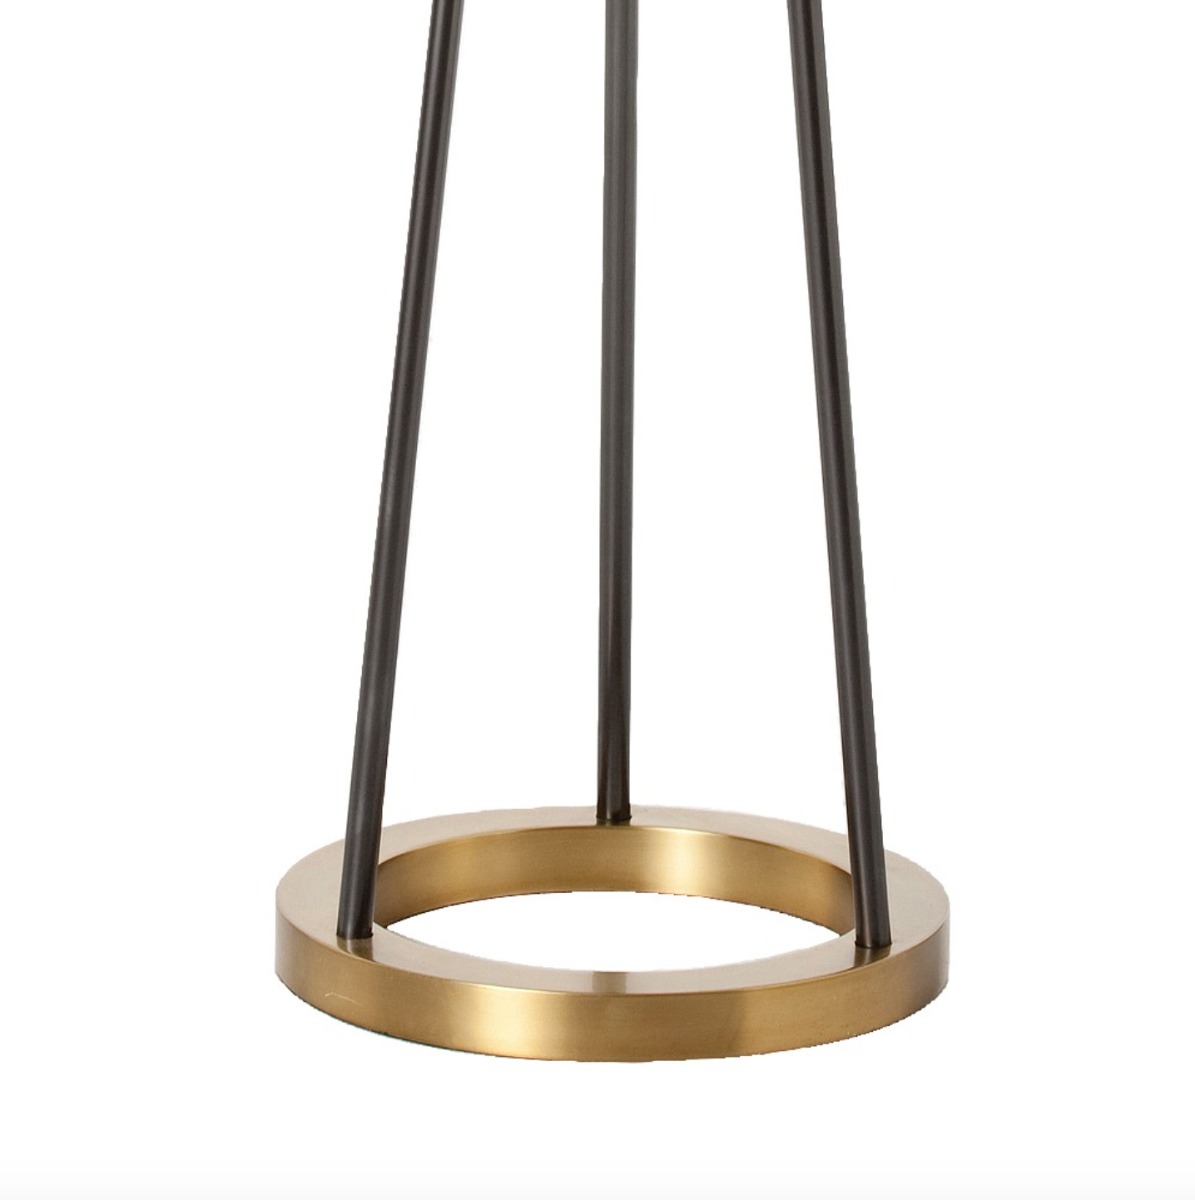 Luxury lighting brass and gold metal floor lamp by Luxuria London